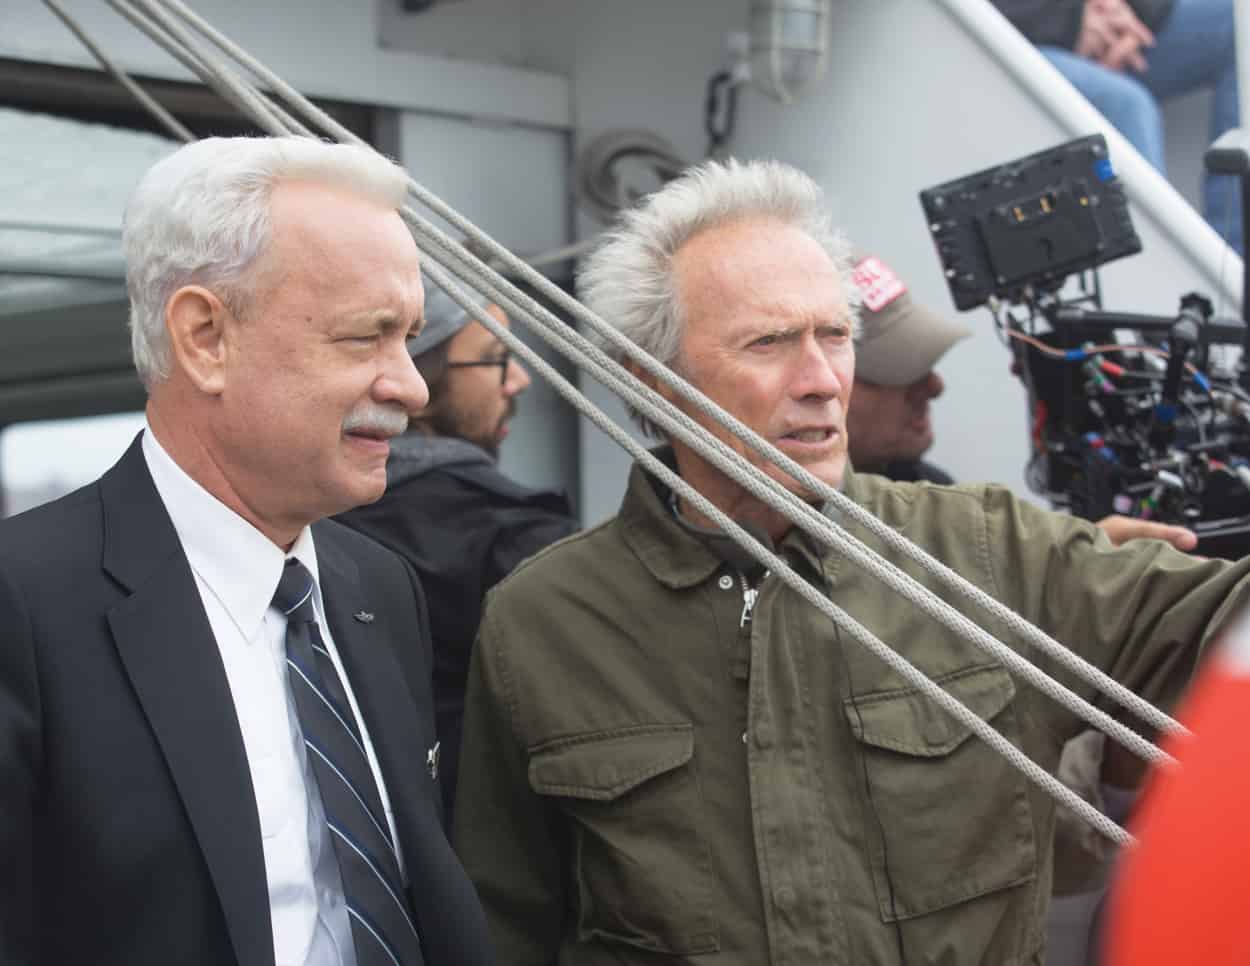 (L-R) Tom Hanks with director/producer, Clint Eastwood on the set of Warner Bros. Pictures’ and Village Roadshow Pictures’ drama SULLY, a Warner Bros. Pictures release. Photo by Keith Bernstein